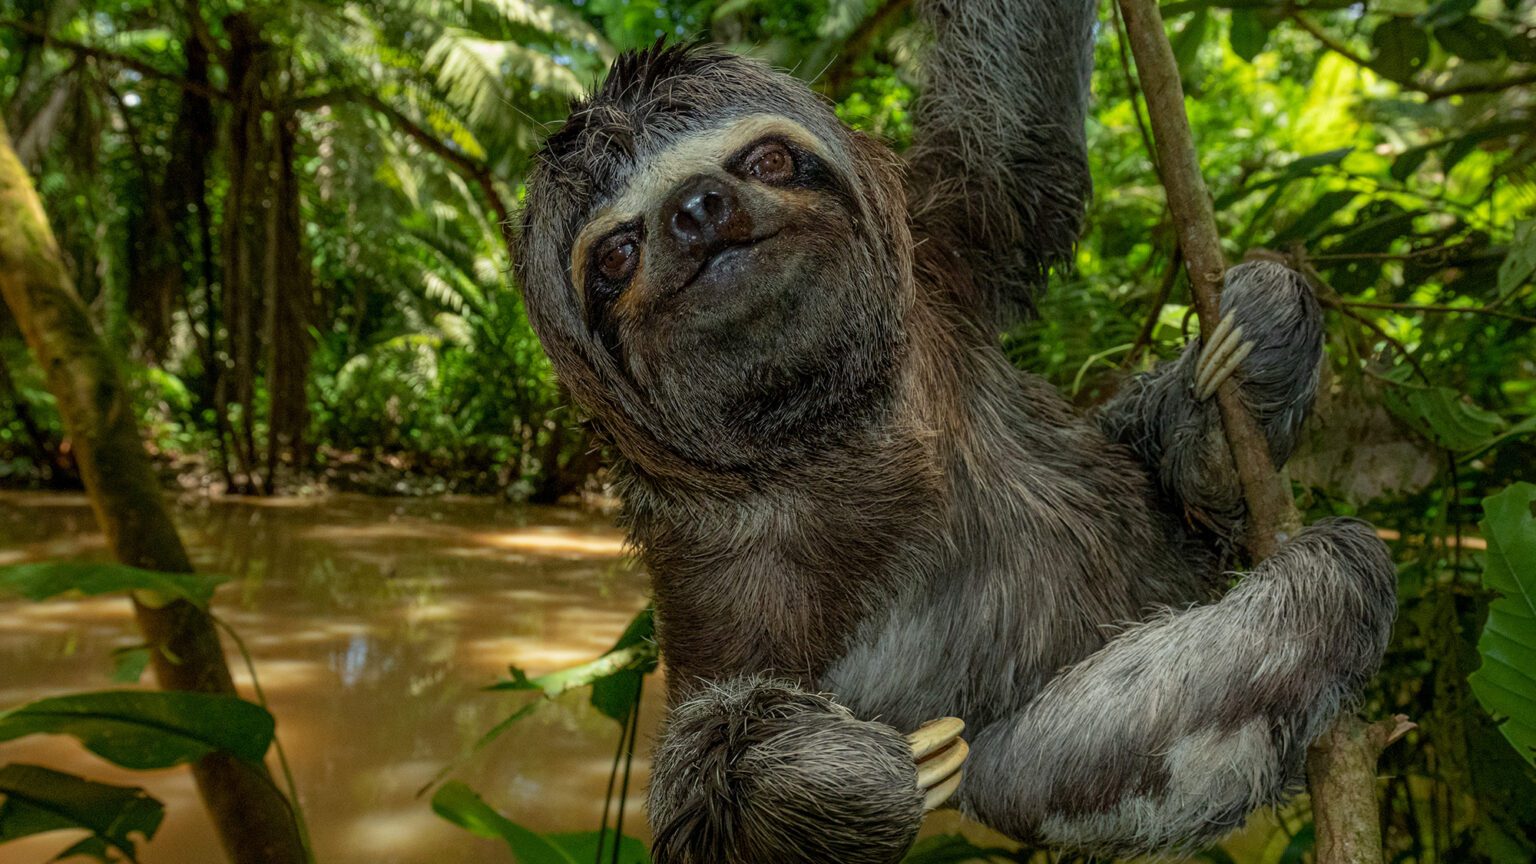 A sloth hanging from a tree in a jungle.